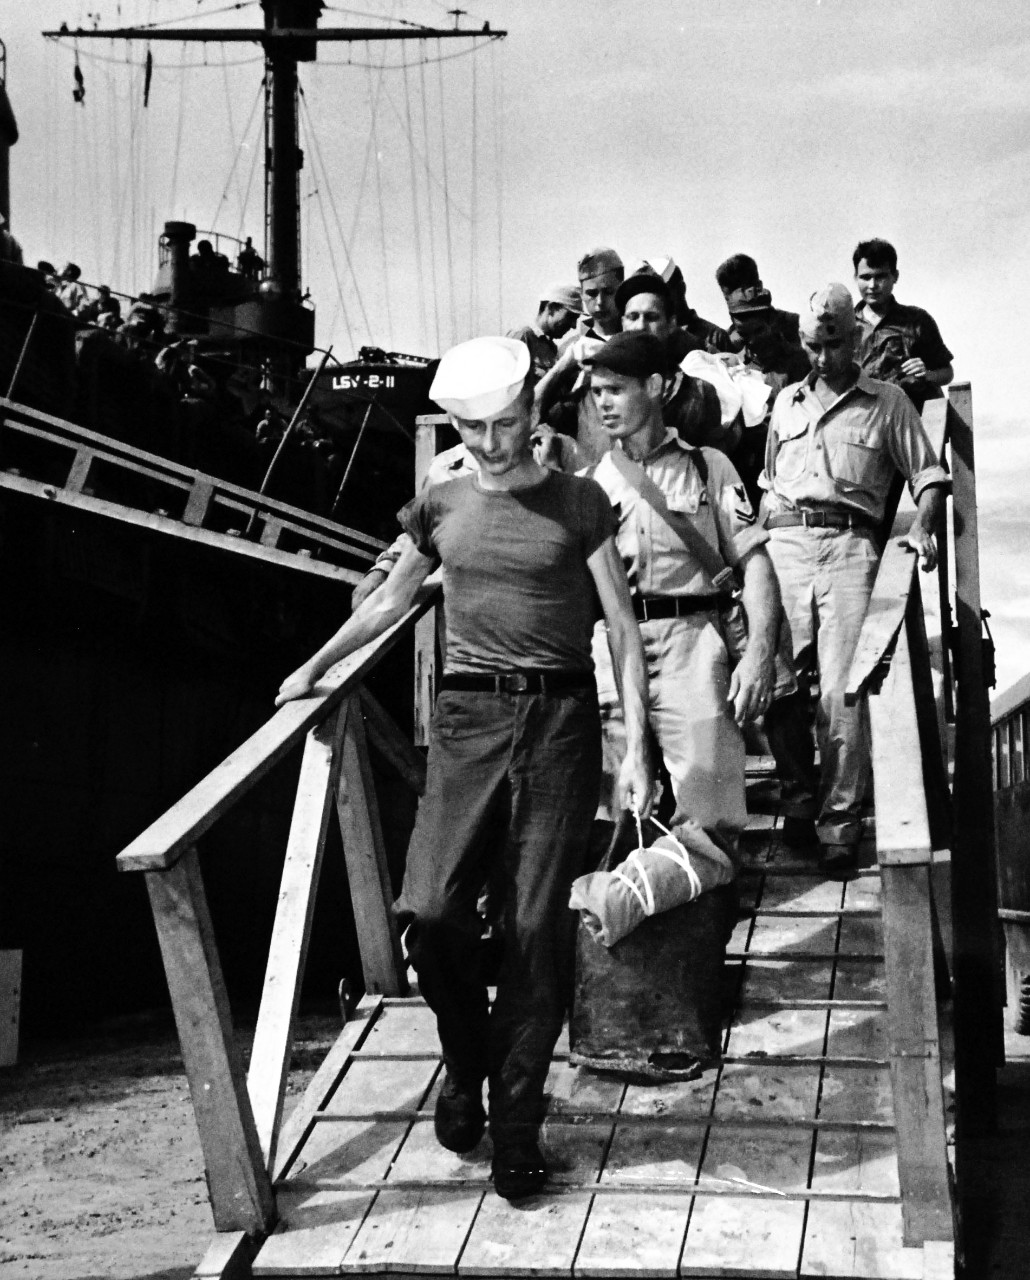 80-G-490496:   Allied Prisoners of War, Guam, 1945.  Liberated American Prisoners of War at Guam, Mariana Islands, after disembarking from USS Ozark (LSV-2) and going down gangplank.  Official U.S. Navy photograph, now in the collections of the National Archives.  (2014/05/29).    The original is a small photograph.   